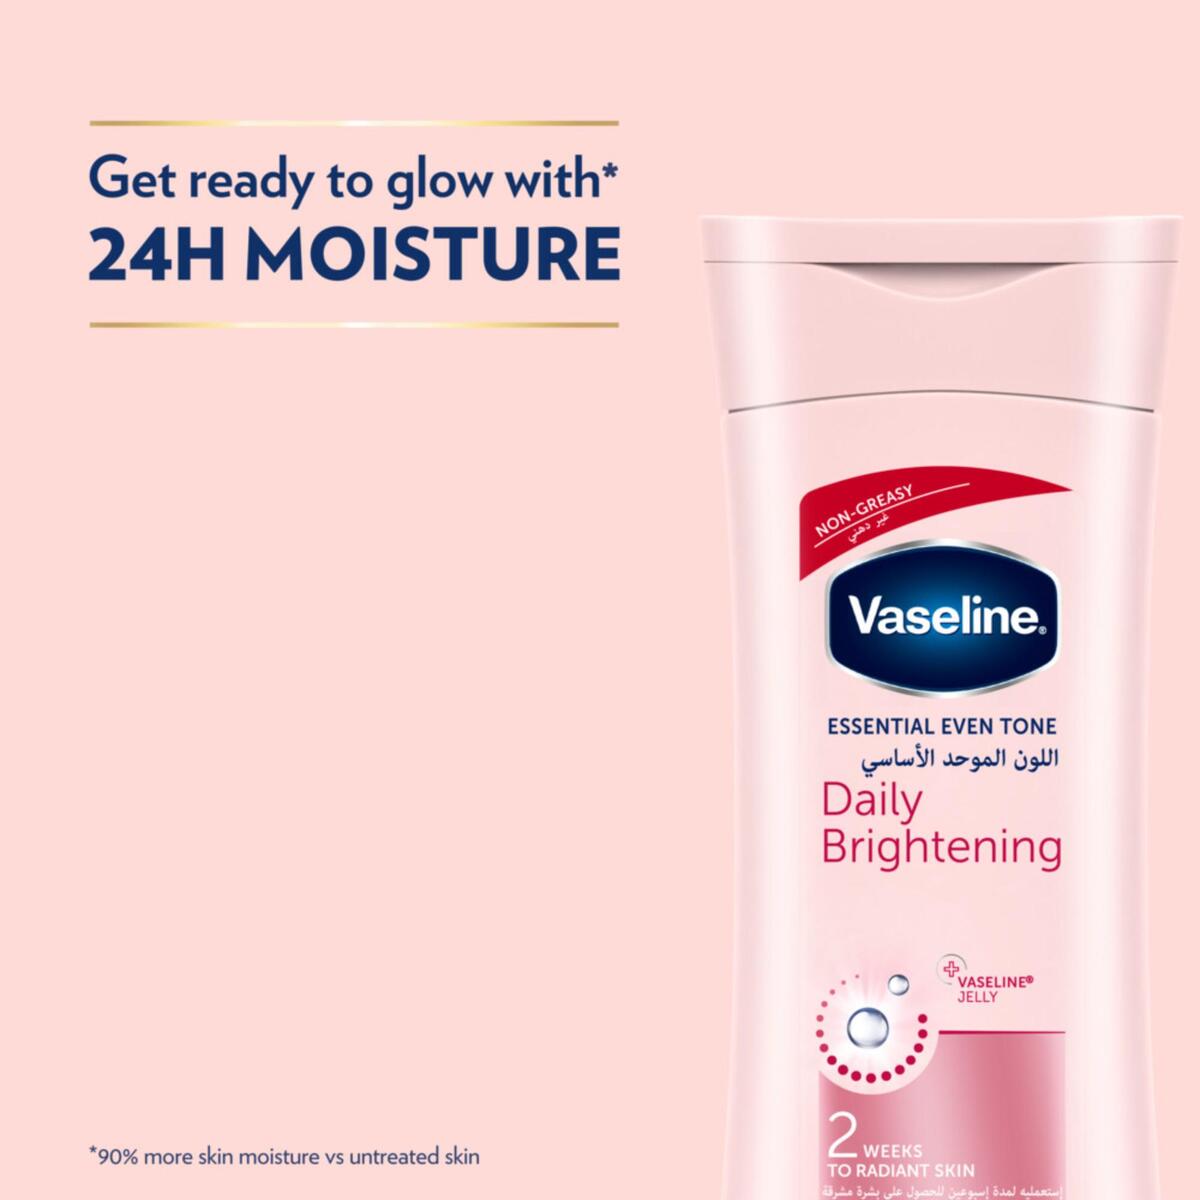 Vaseline Essential Even Tone Daily Brightening Body Lotion 200 ml